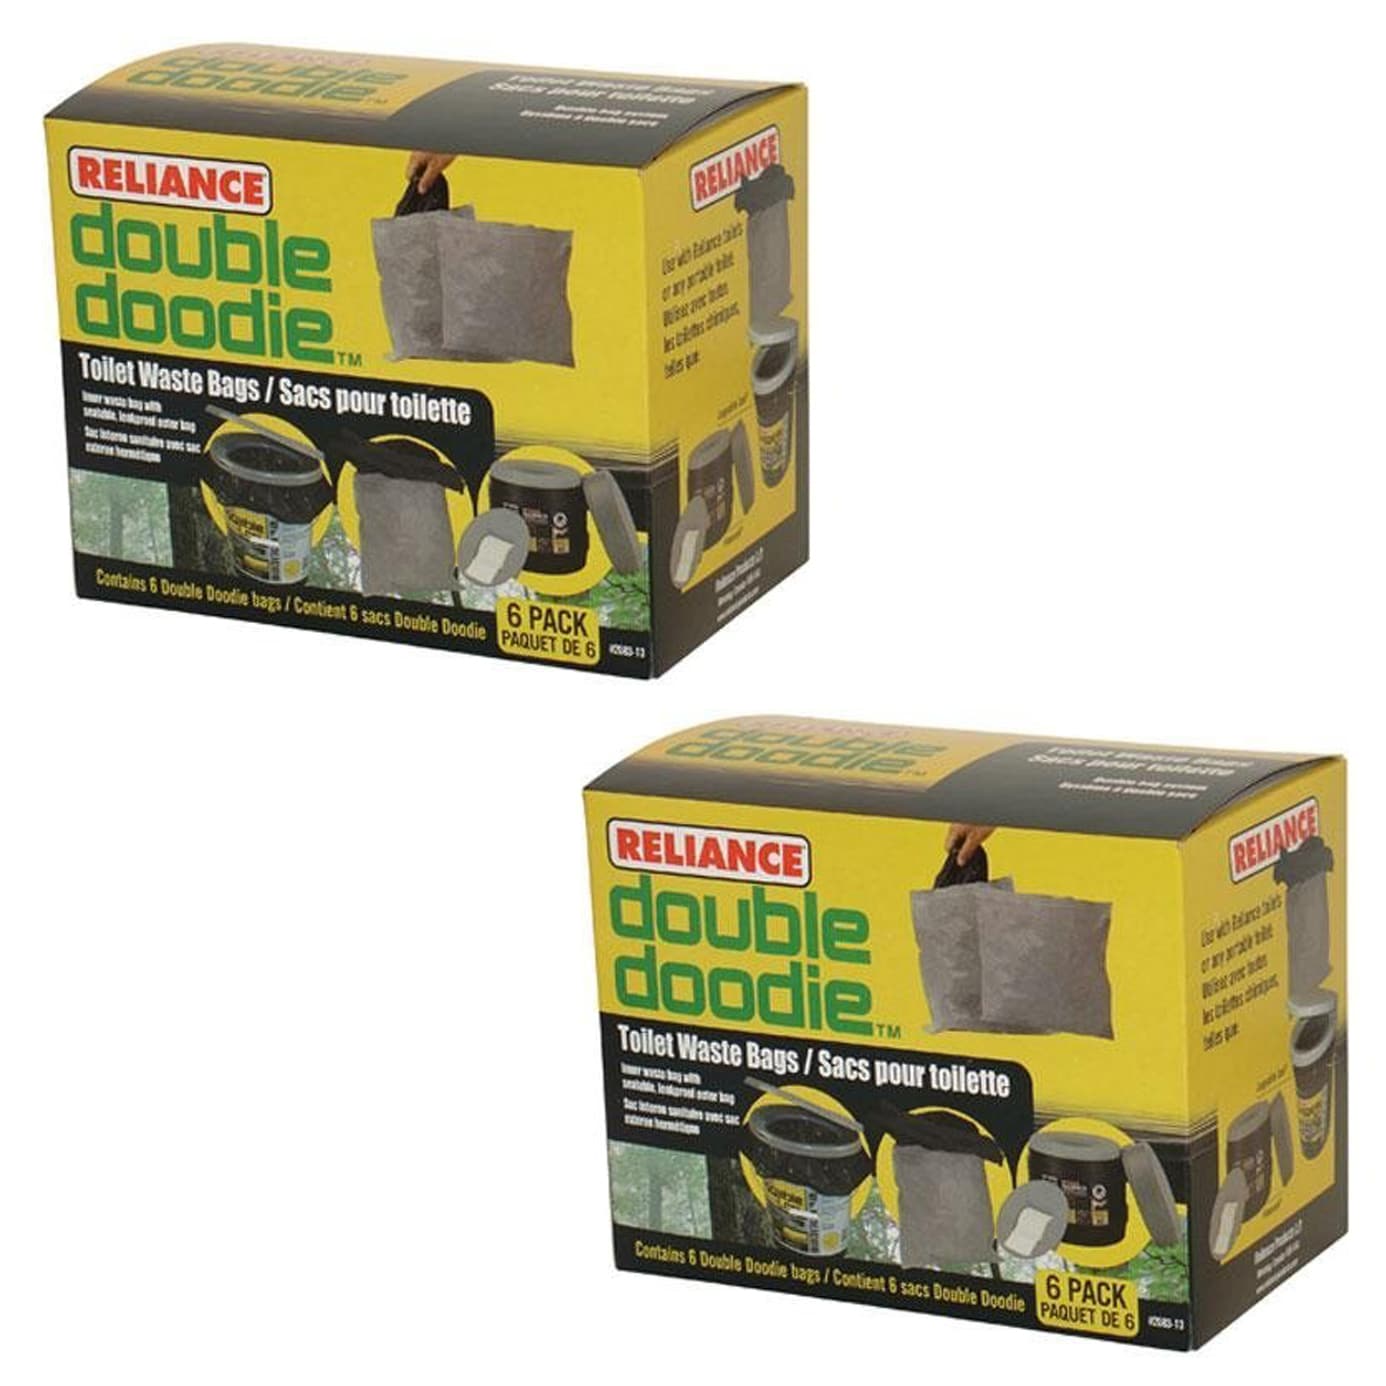 Amazoncom Reliance Products 268303 Double Doodie Toilet Waste Bags  6Pack Black  Sports  Outdoors